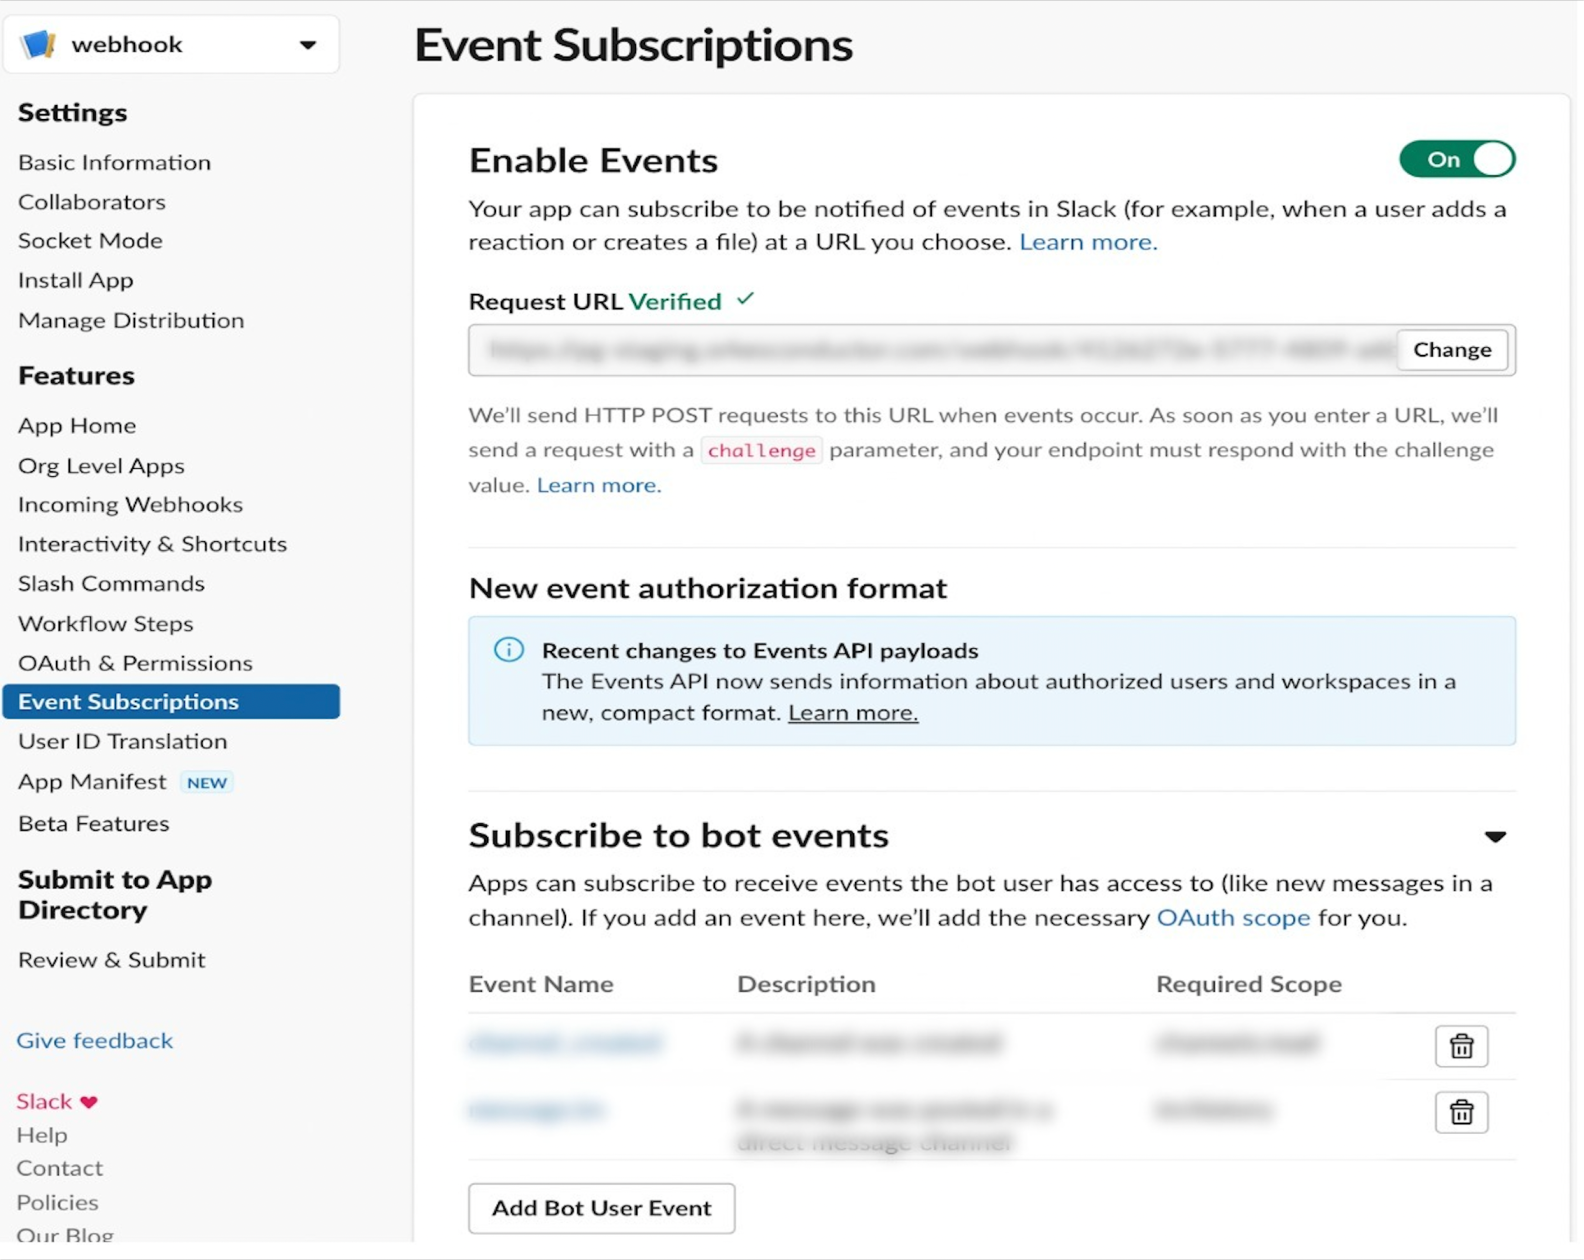 Enabling events for connecting webhook with Slack app